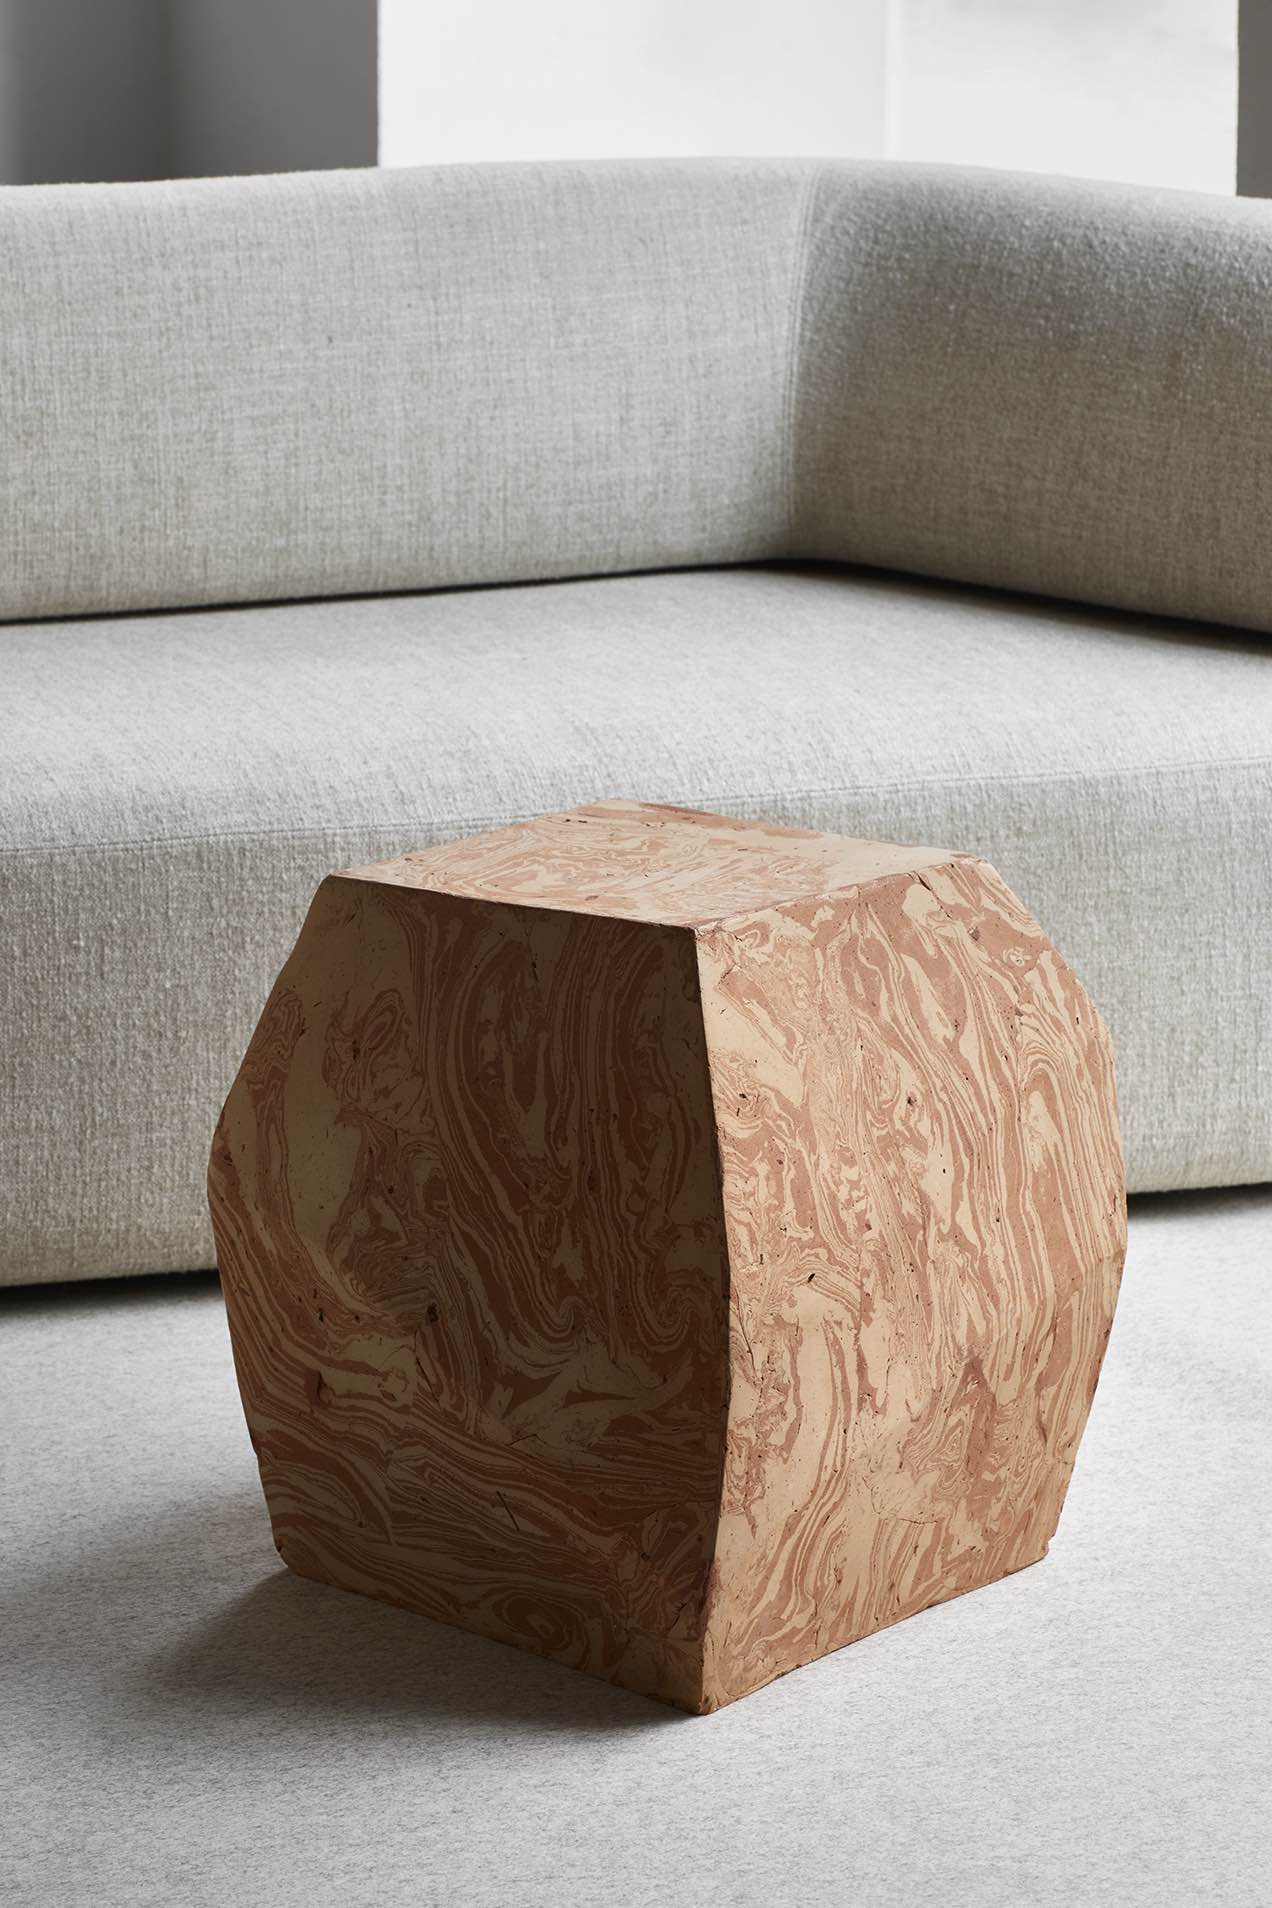 TERRA-sidetable-Luca-Erba_Collection_Particuliere